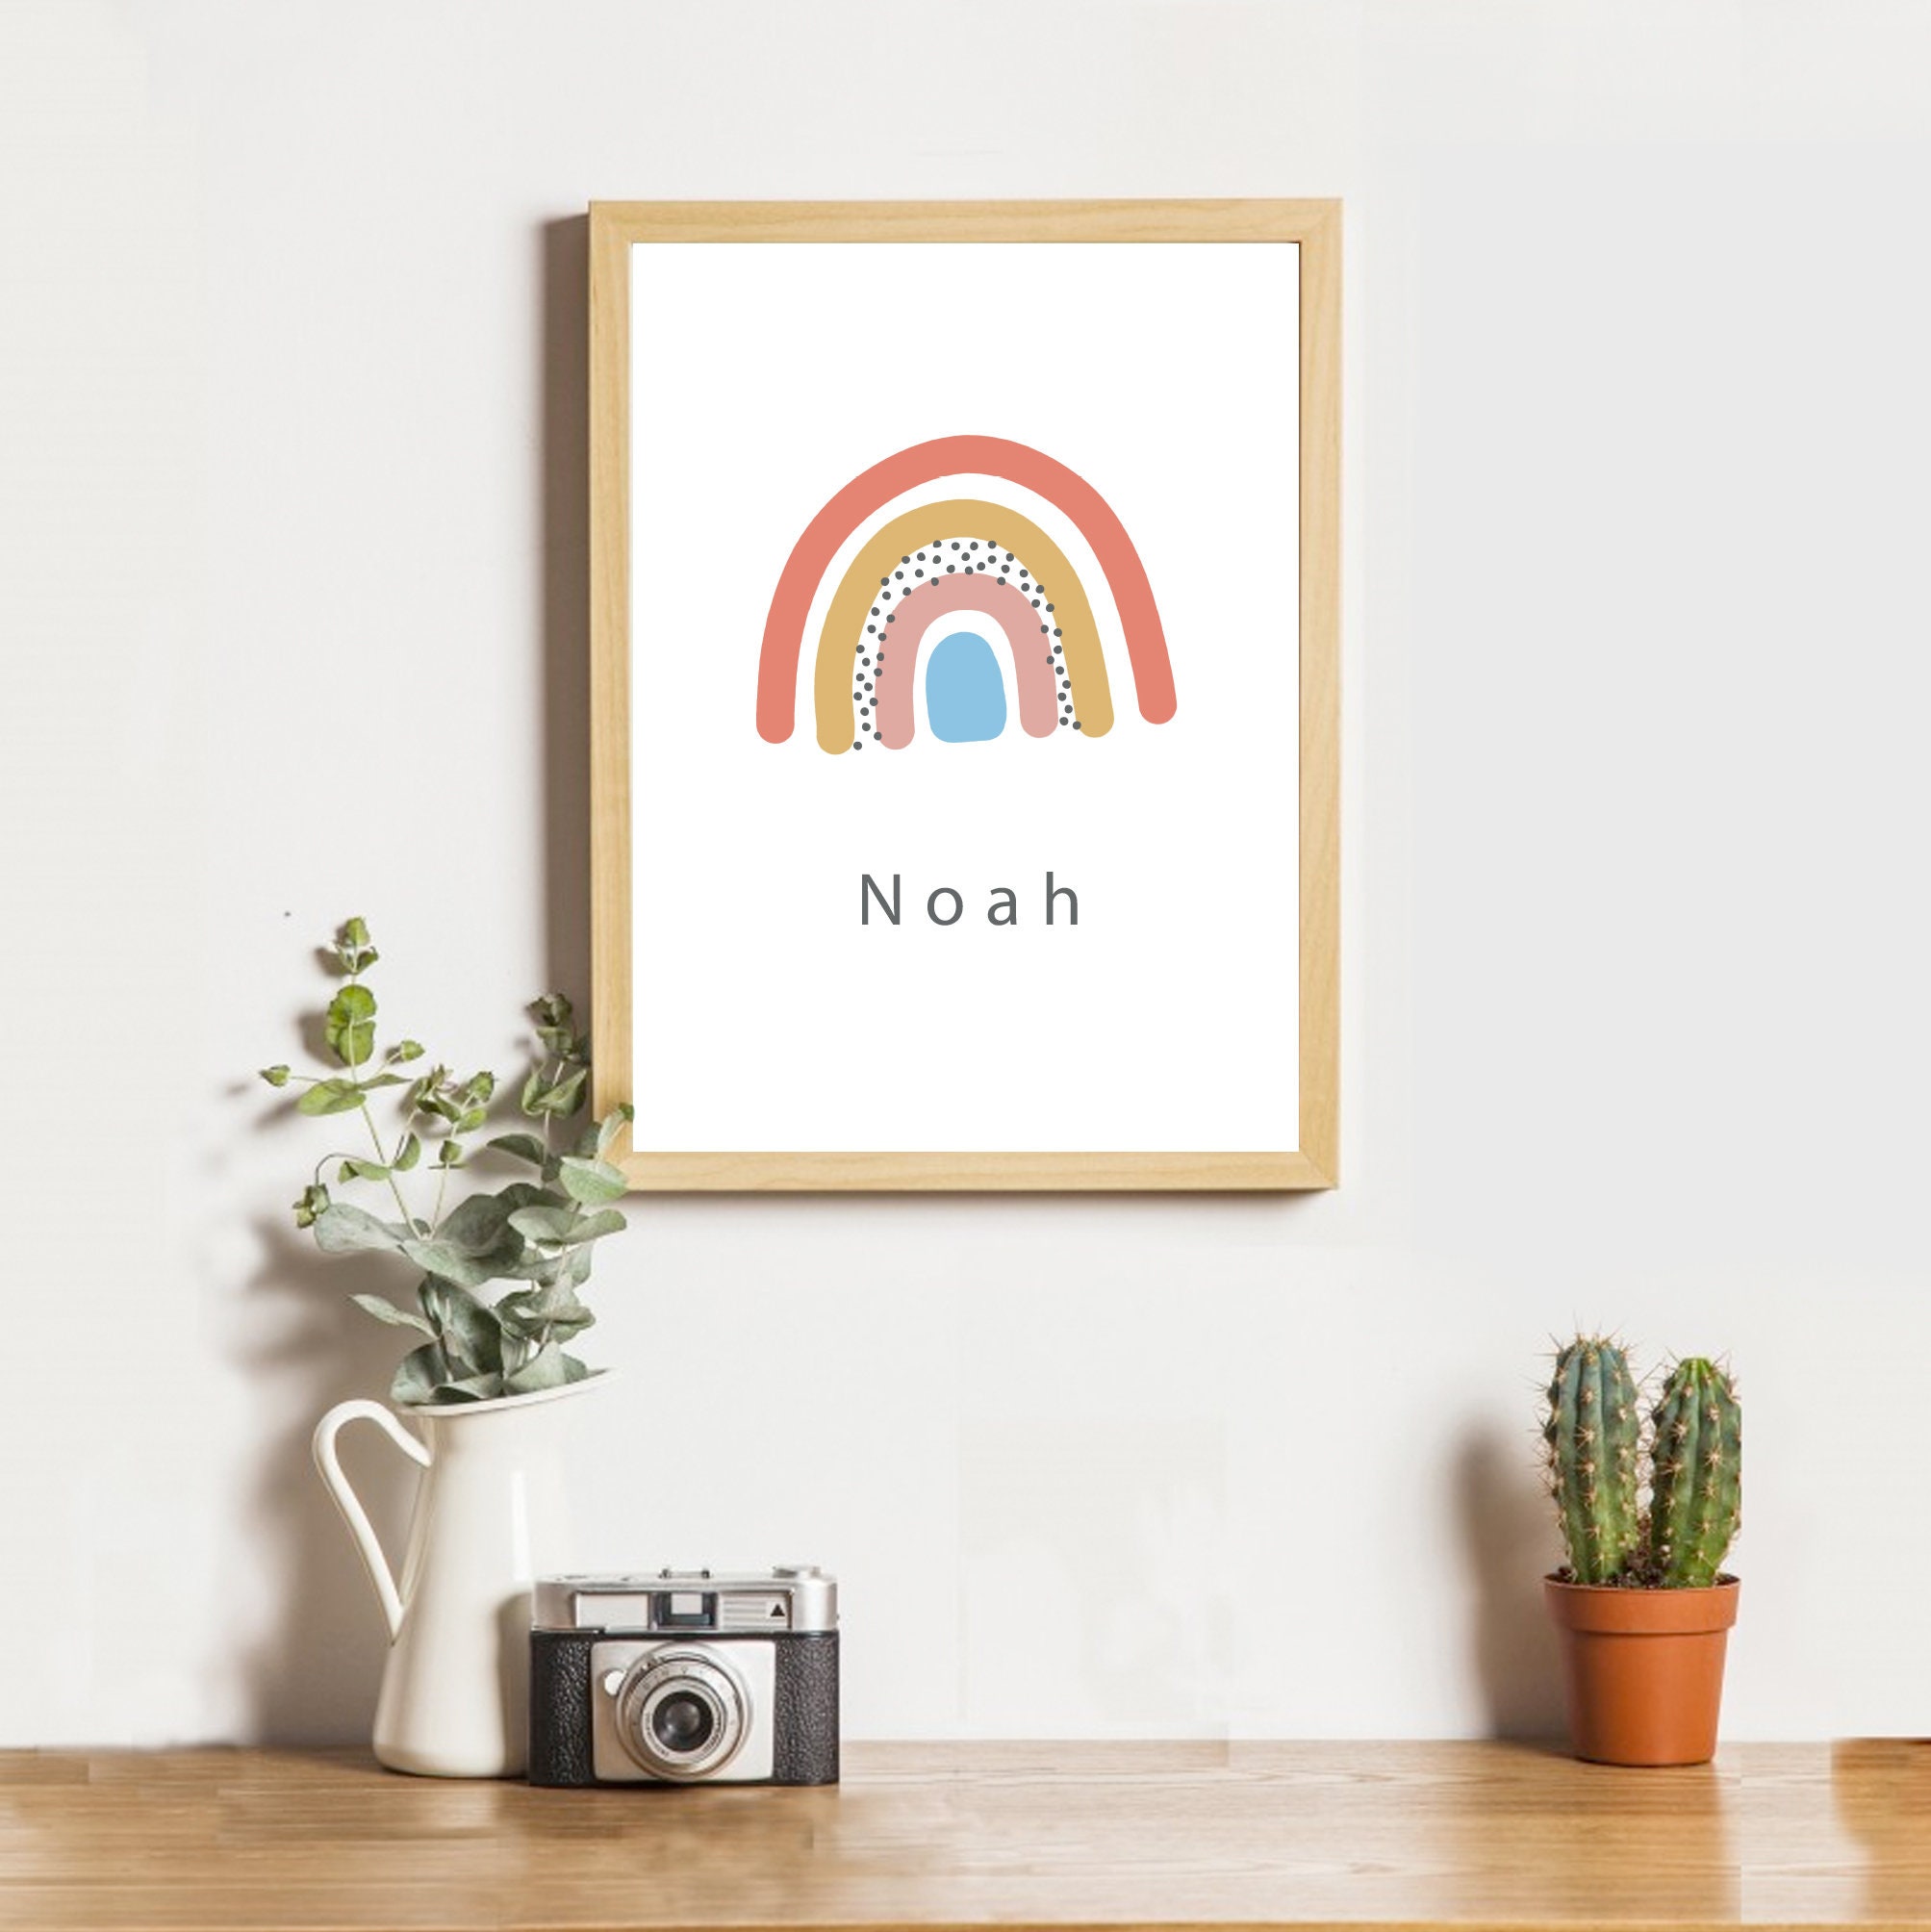 Set of 3 Prints Personalized Gifts Above Bed Decor Kids Wall Art Poster  Rainbow Nursery Name Sign Art For Kids Hub